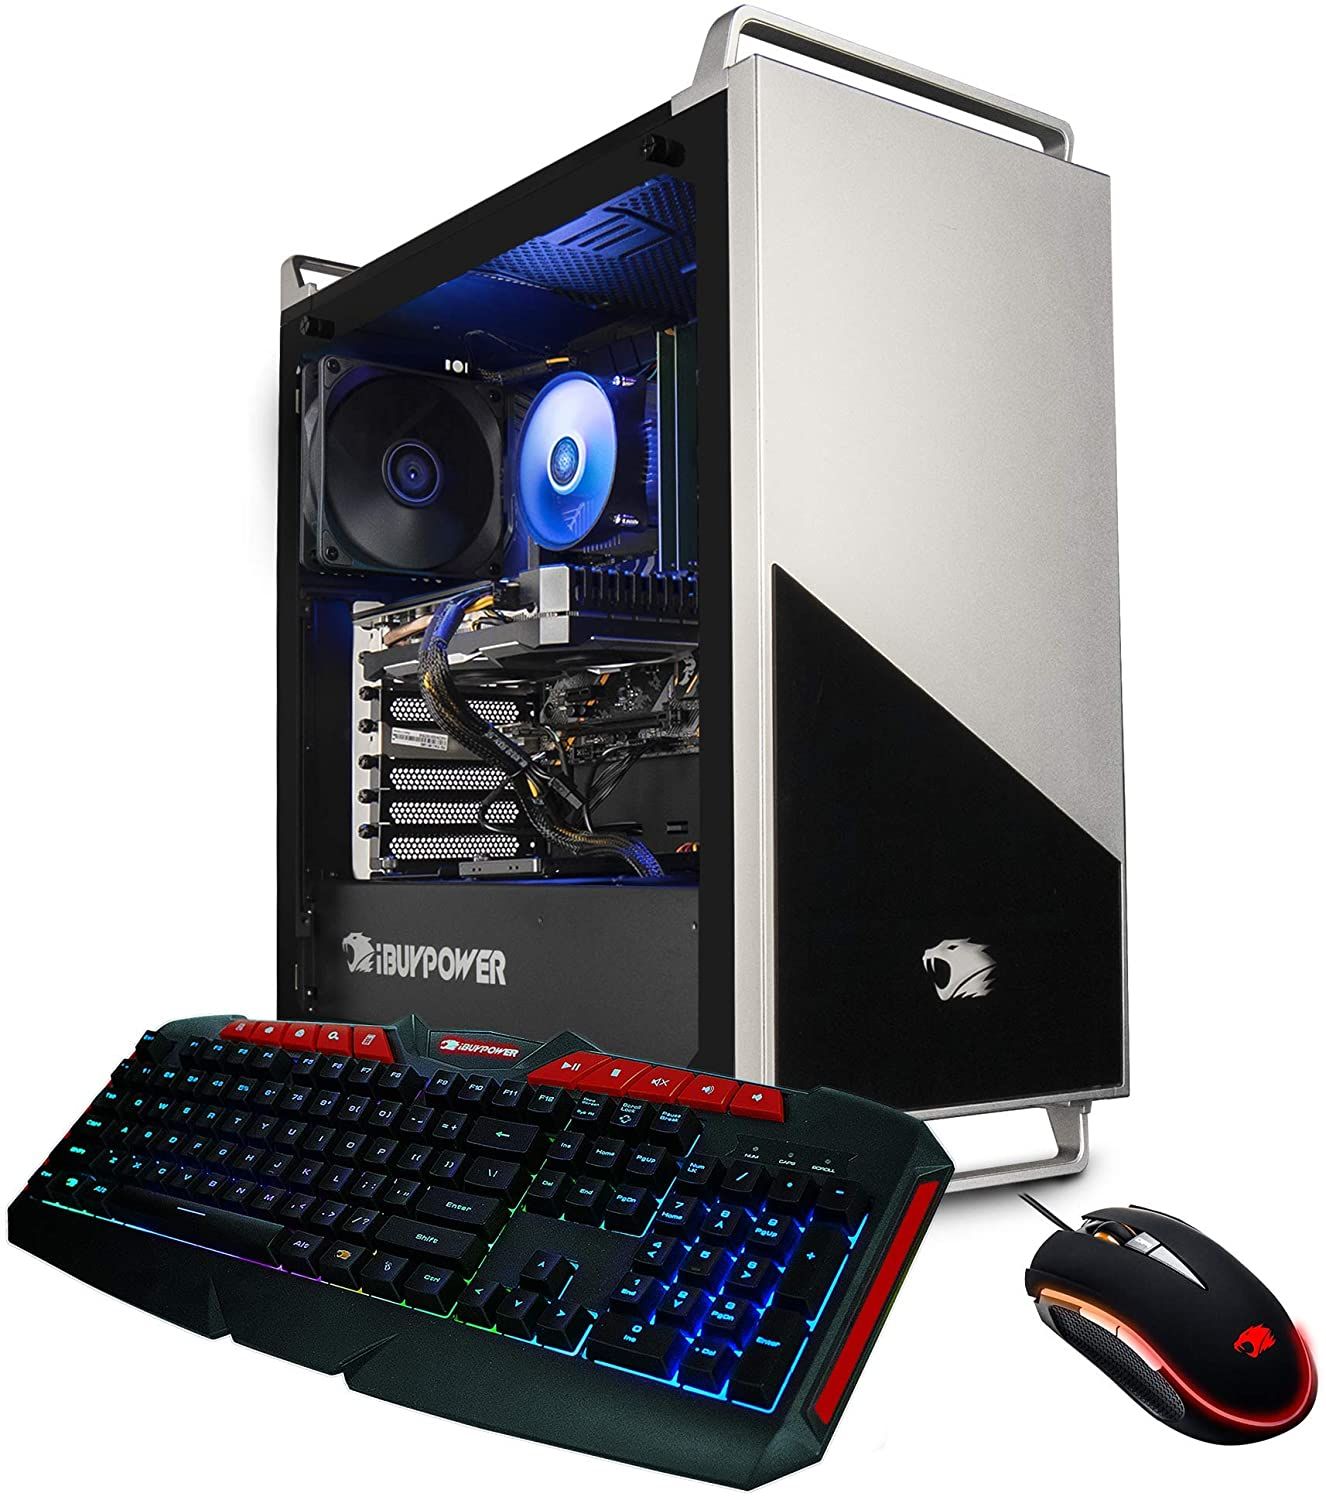 ergonomic What Are The Best Prebuilt Pc Brands with Wall Mounted Monitor